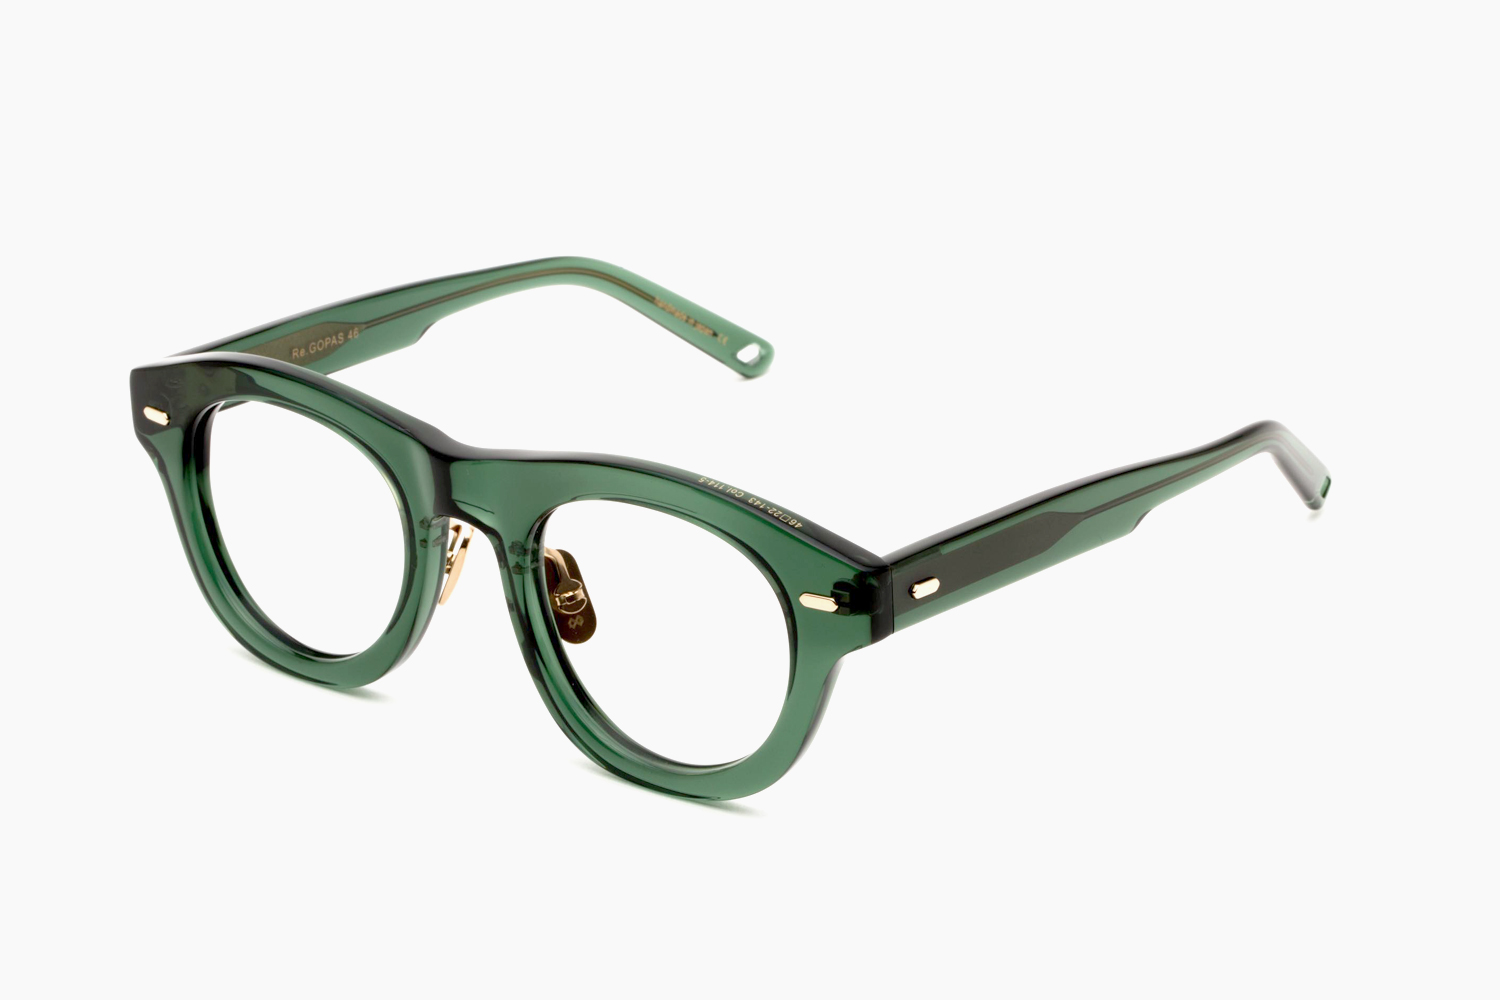 OG×OLIVER GOLDSMITH｜Re:GOPAS 46 114-5｜PRODUCT｜Continuer  Inc.｜メガネ・サングラス｜Select Shop